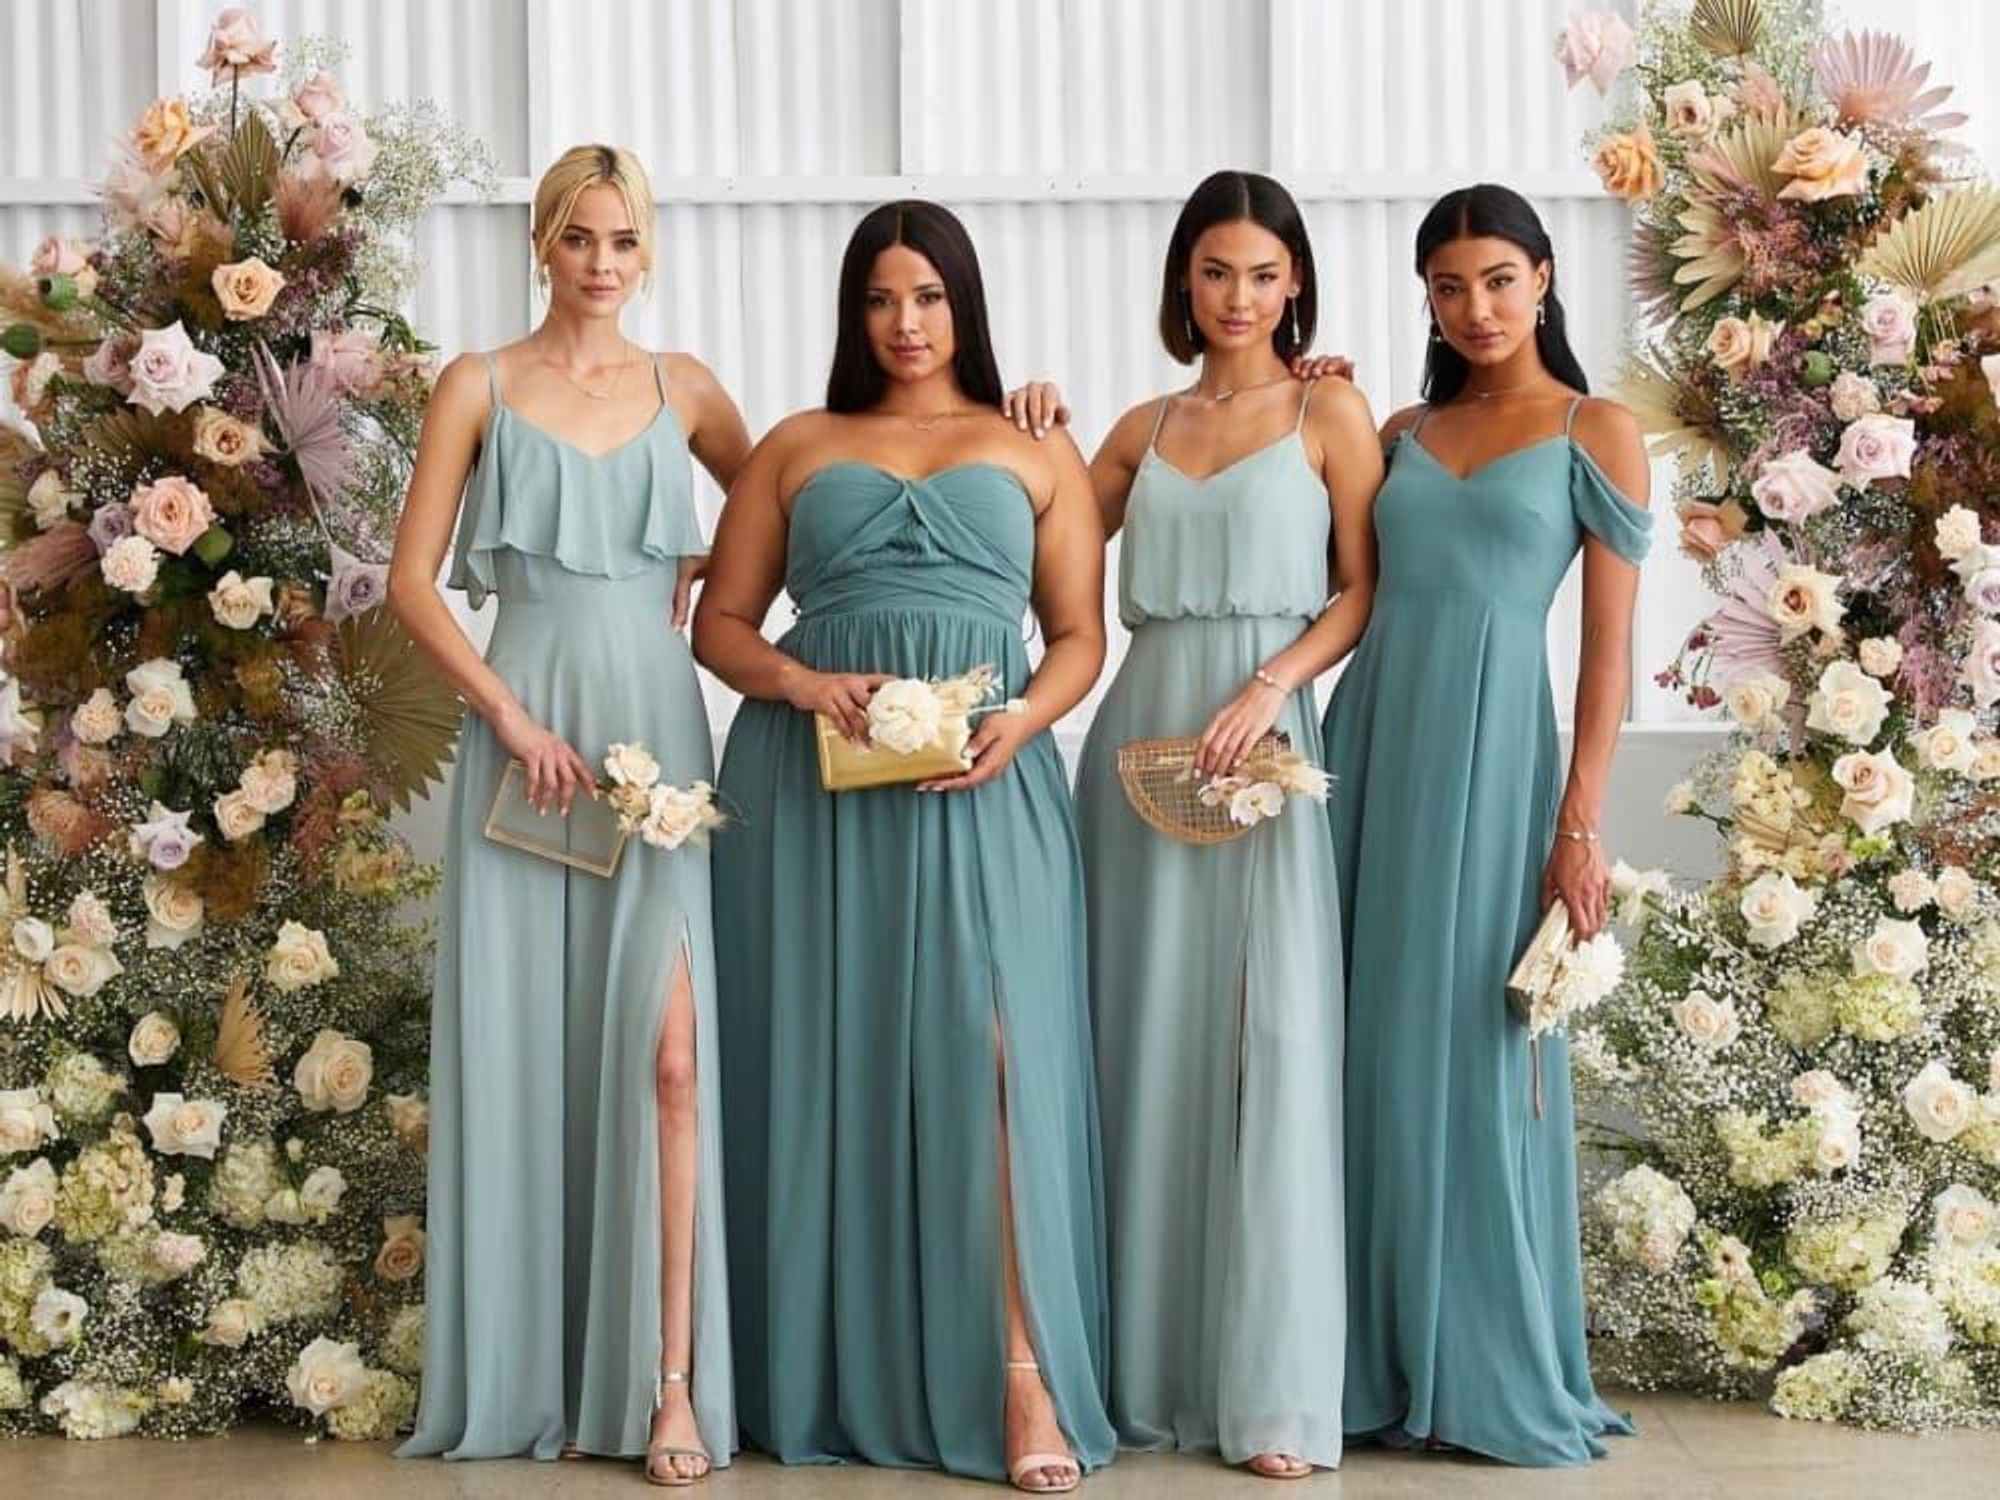 Cult-favorite bridal brand brings $99 bridesmaid dresses to one-day pop-up  in Plano - CultureMap Dallas